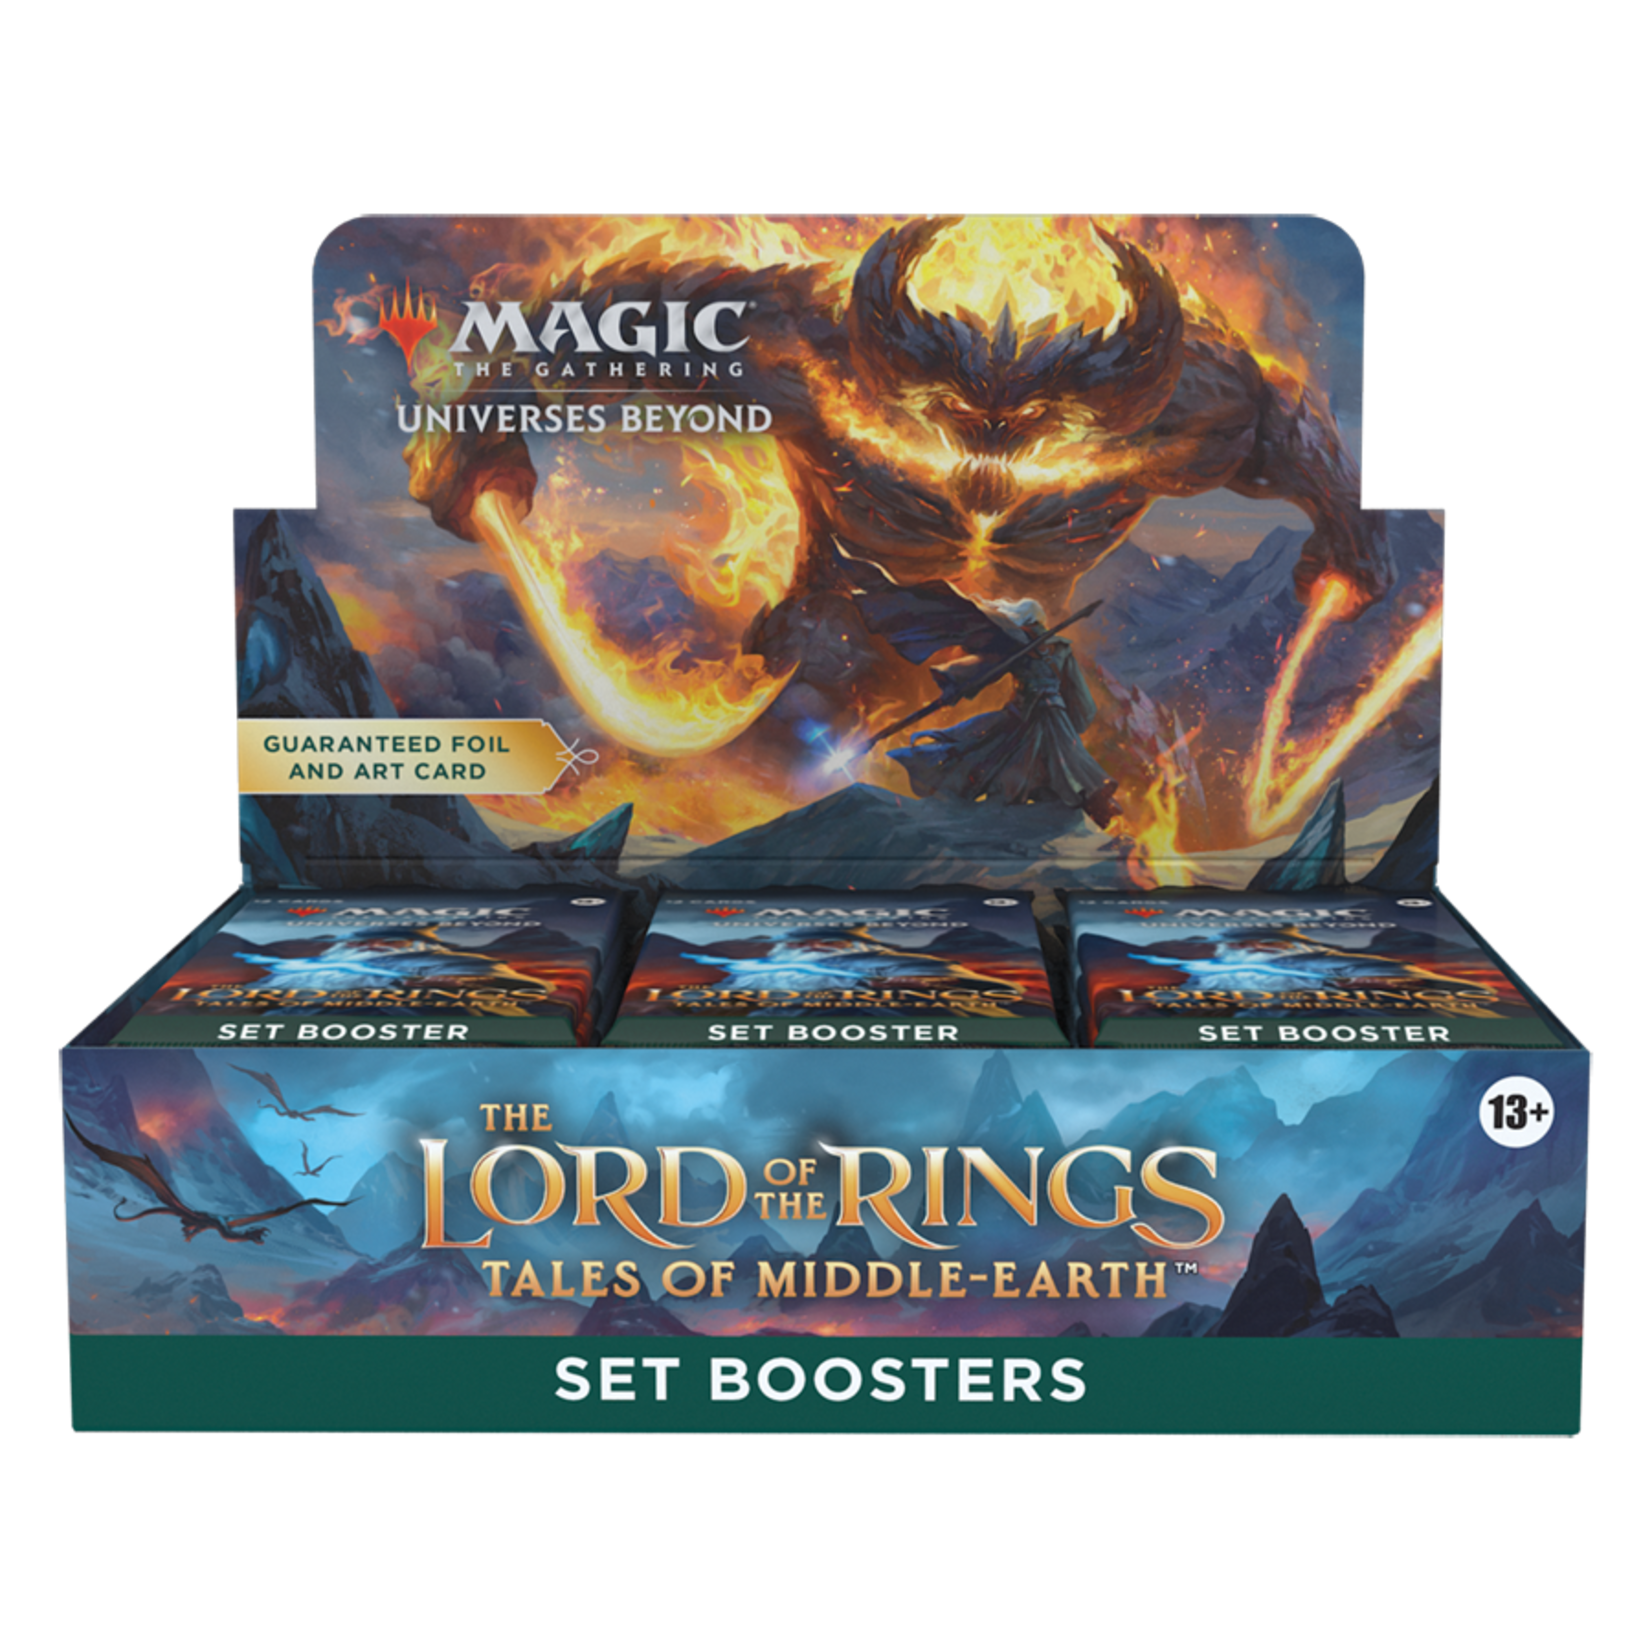  Magic: The Gathering: The Lord of the Rings: Tales of  Middle-earth